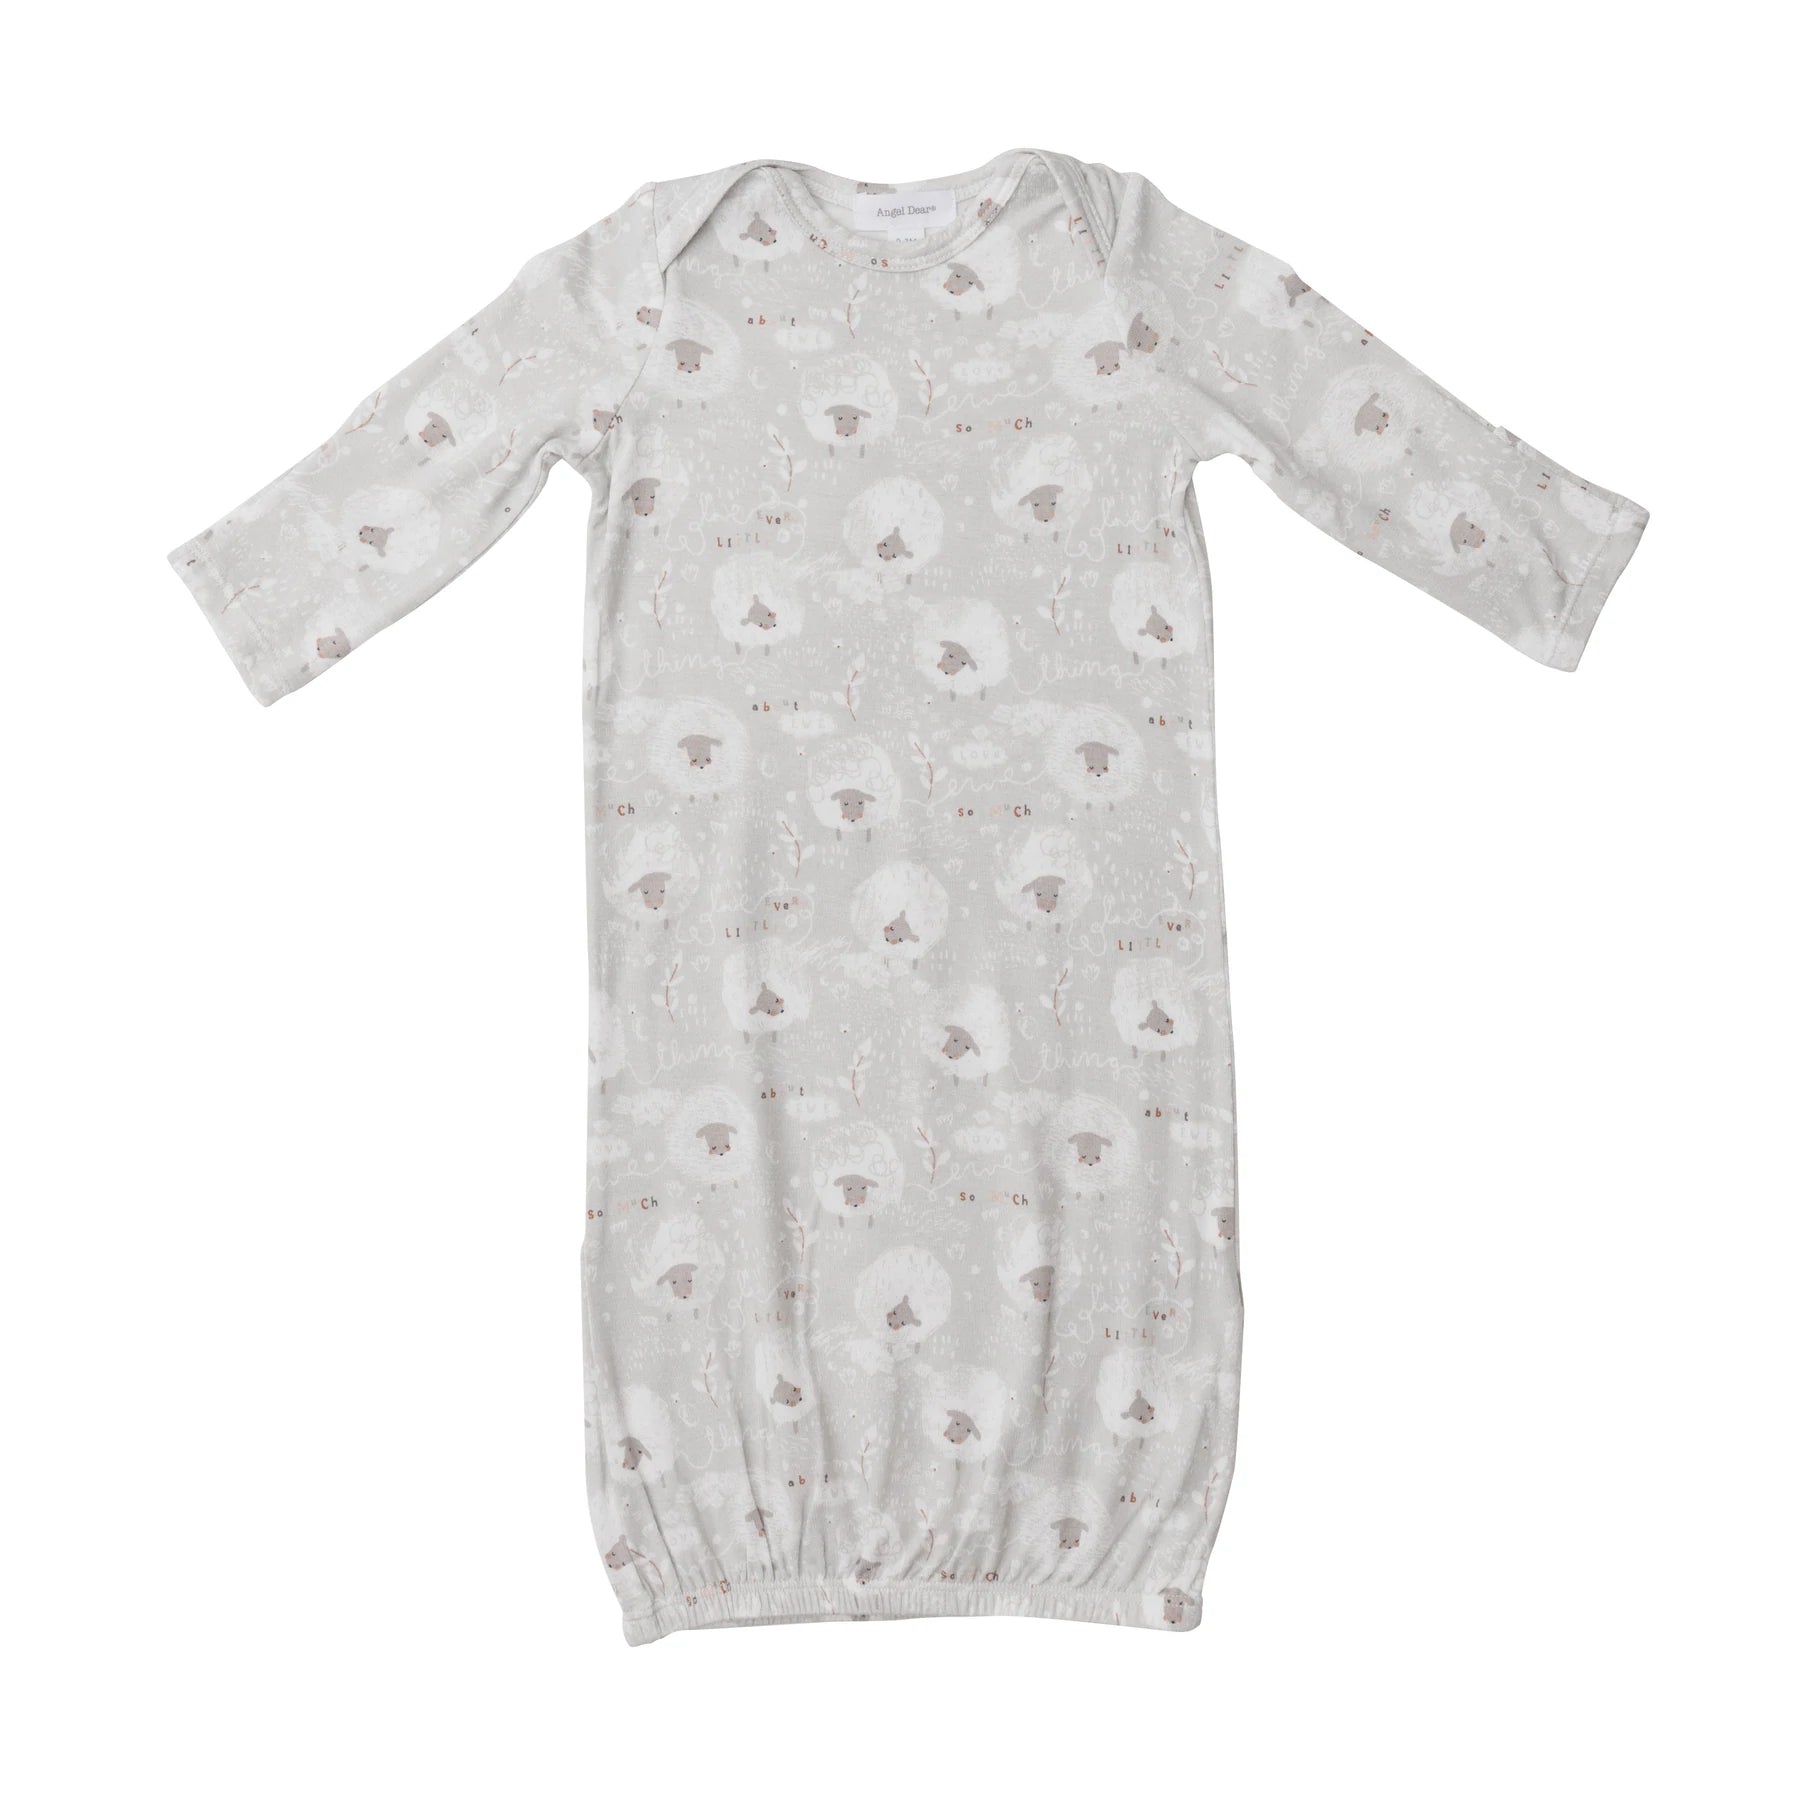 Gown in Love Ewe Sheep  - Doodlebug's Children's Boutique